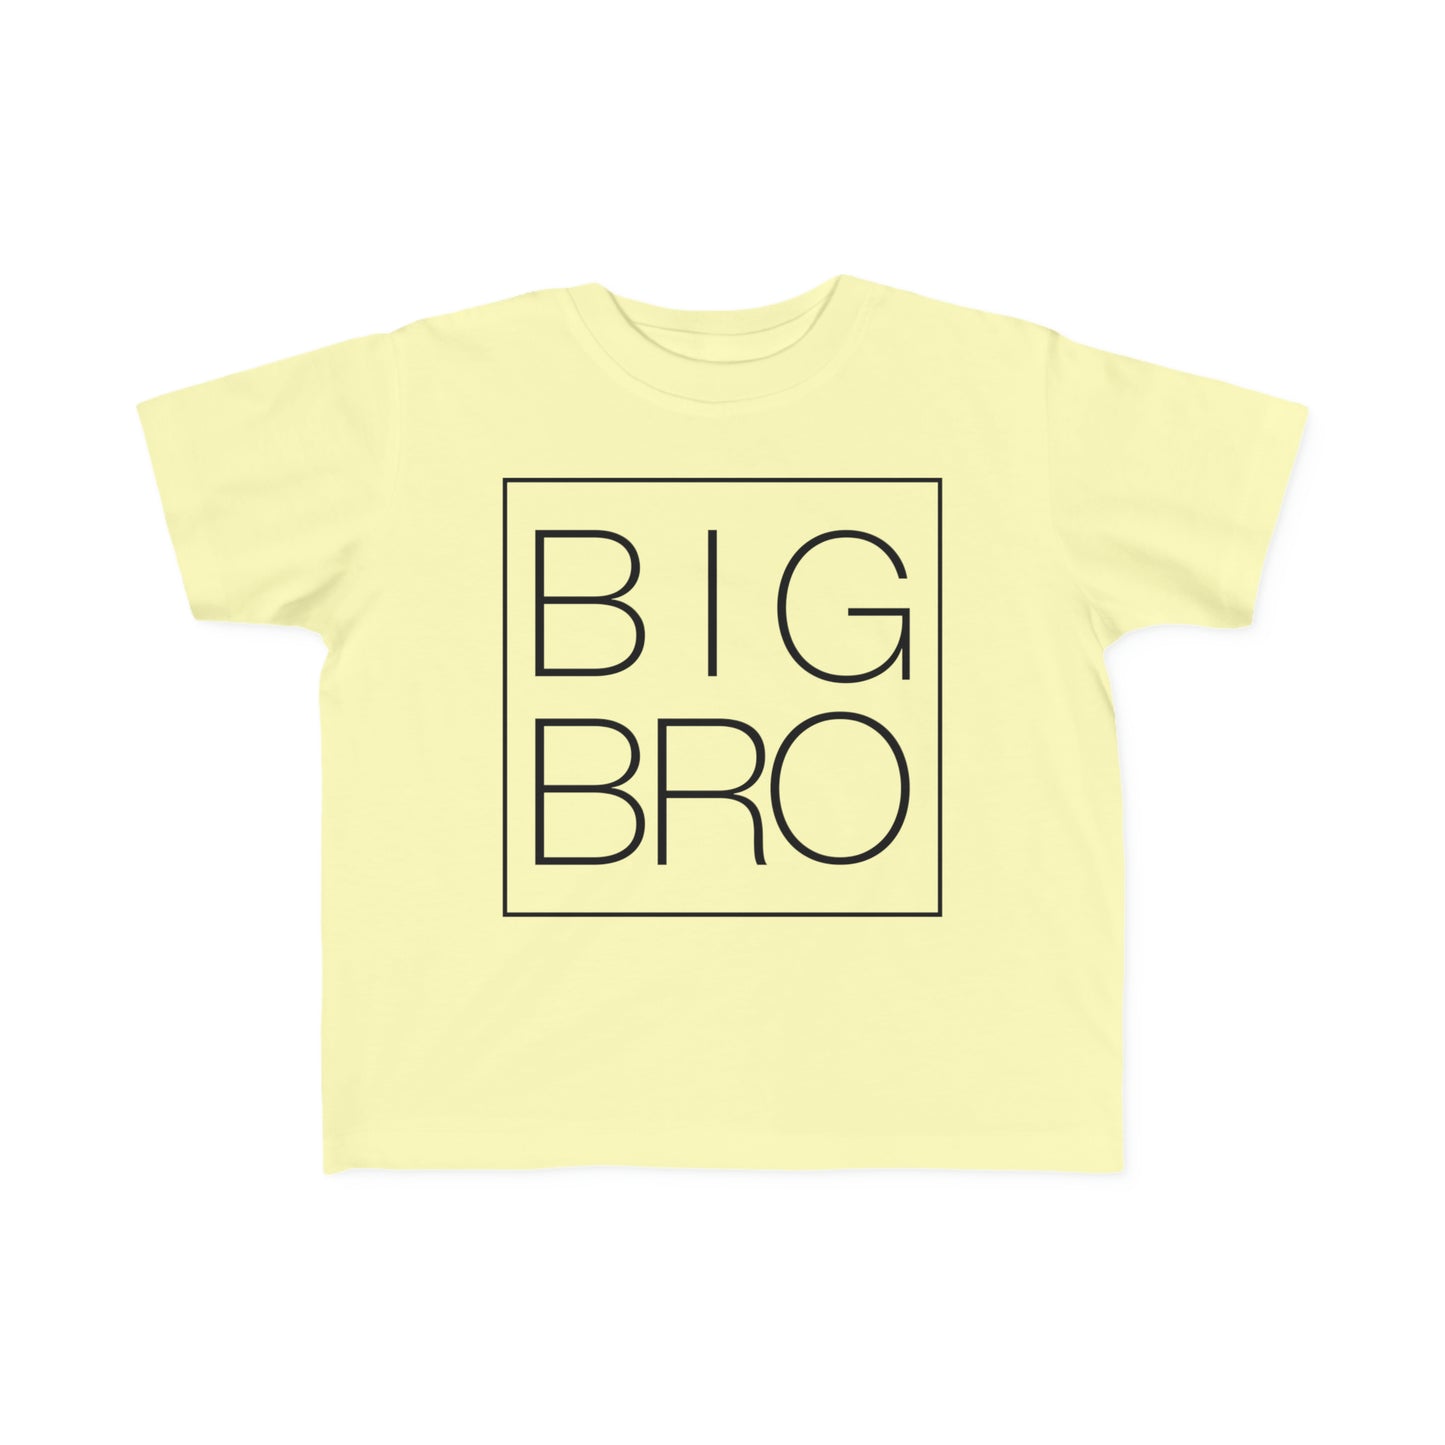 Big Bro Outlined Toddler's Fine Jersey Tee